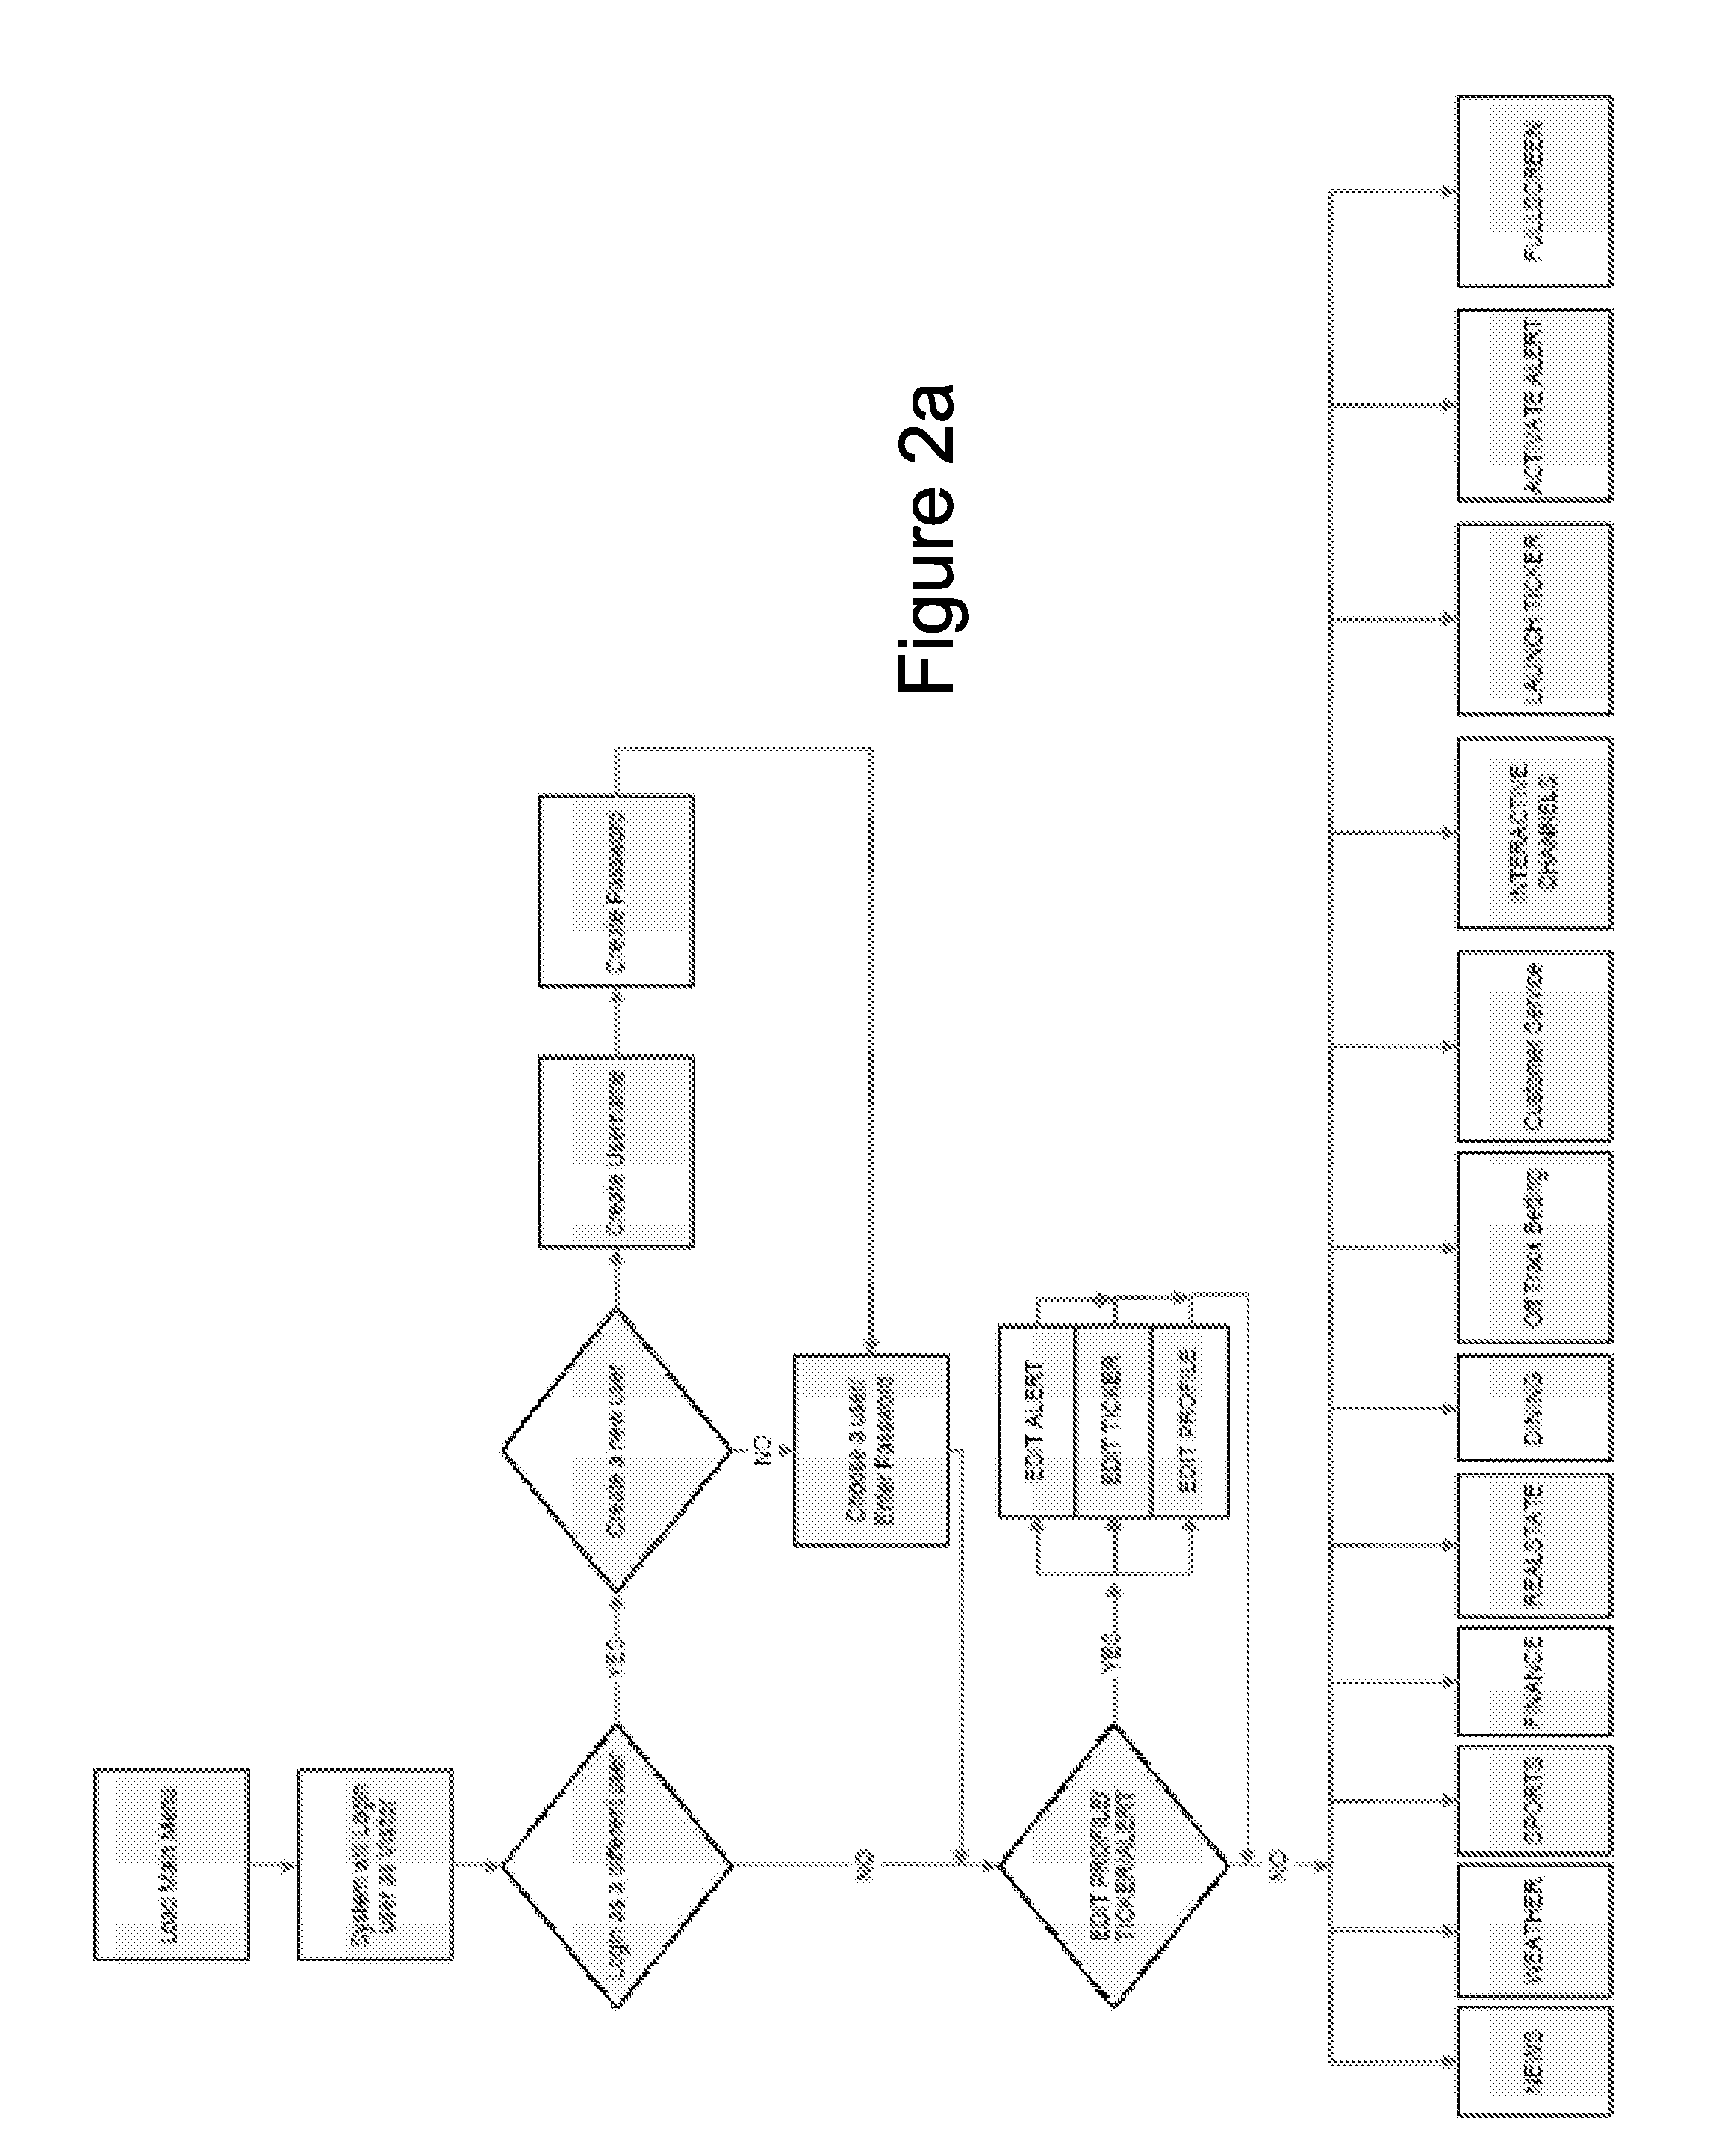 Template Based System, Device and Method for Providing Interactive Content